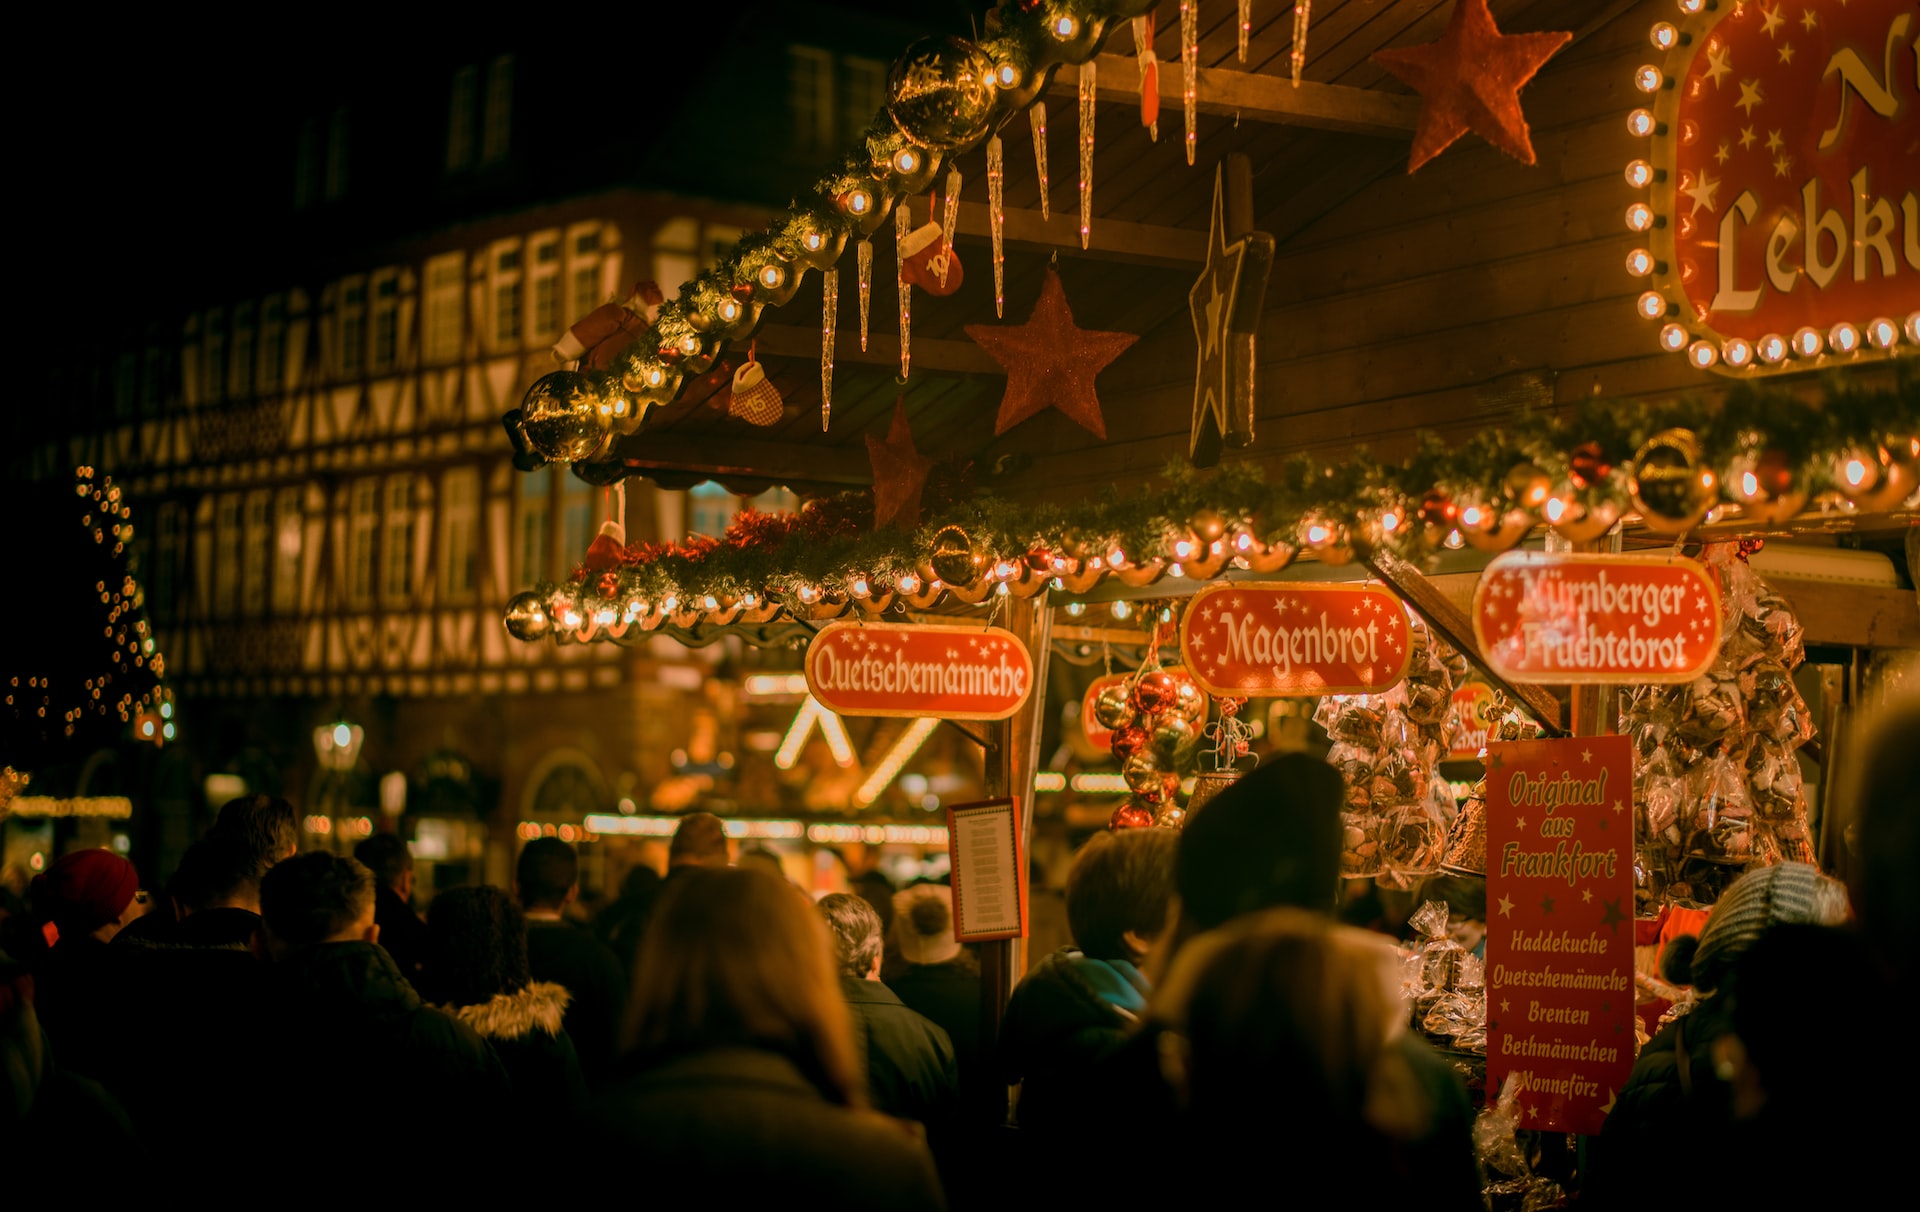 A gingerbread booth at the Frankfurt City Christmas Market in Germany.